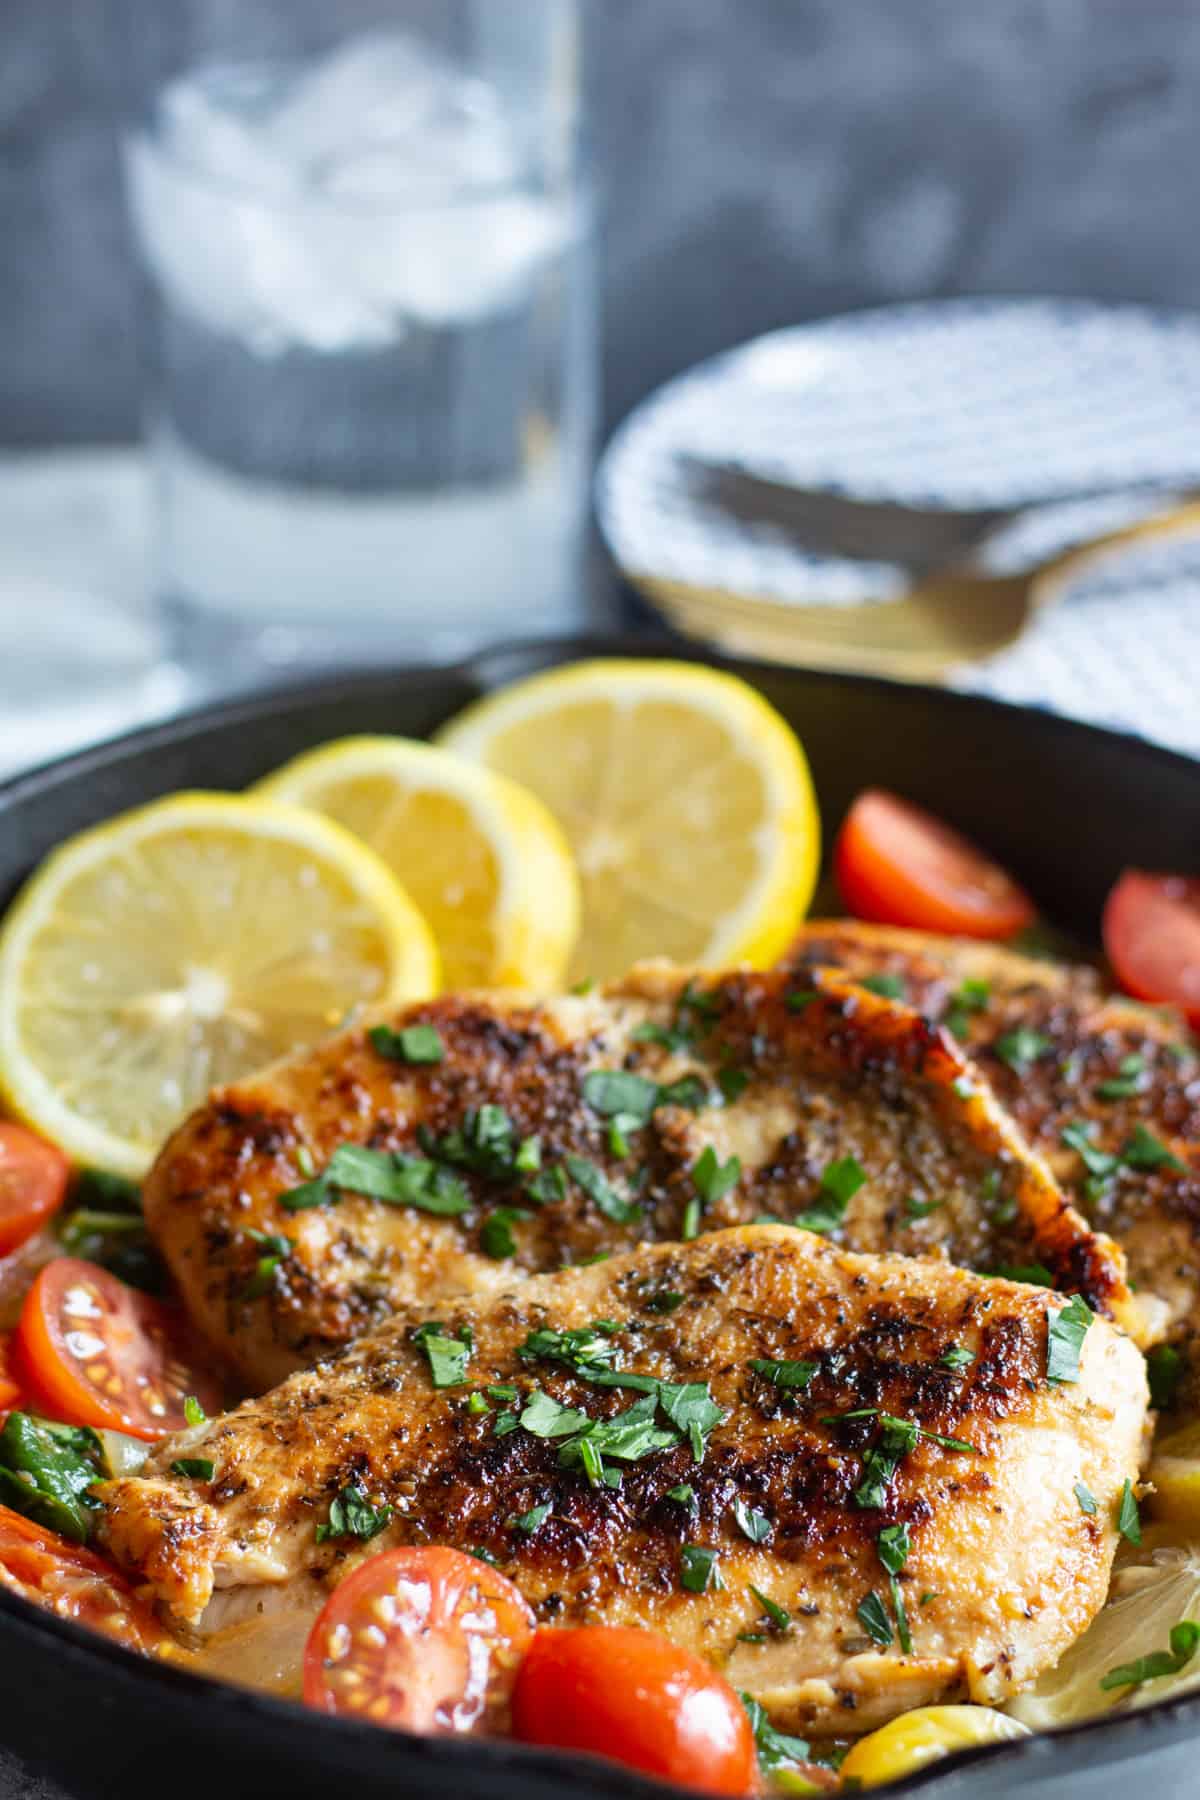 add some freshly squeeze lemon juice on this Italian chicken before serving.